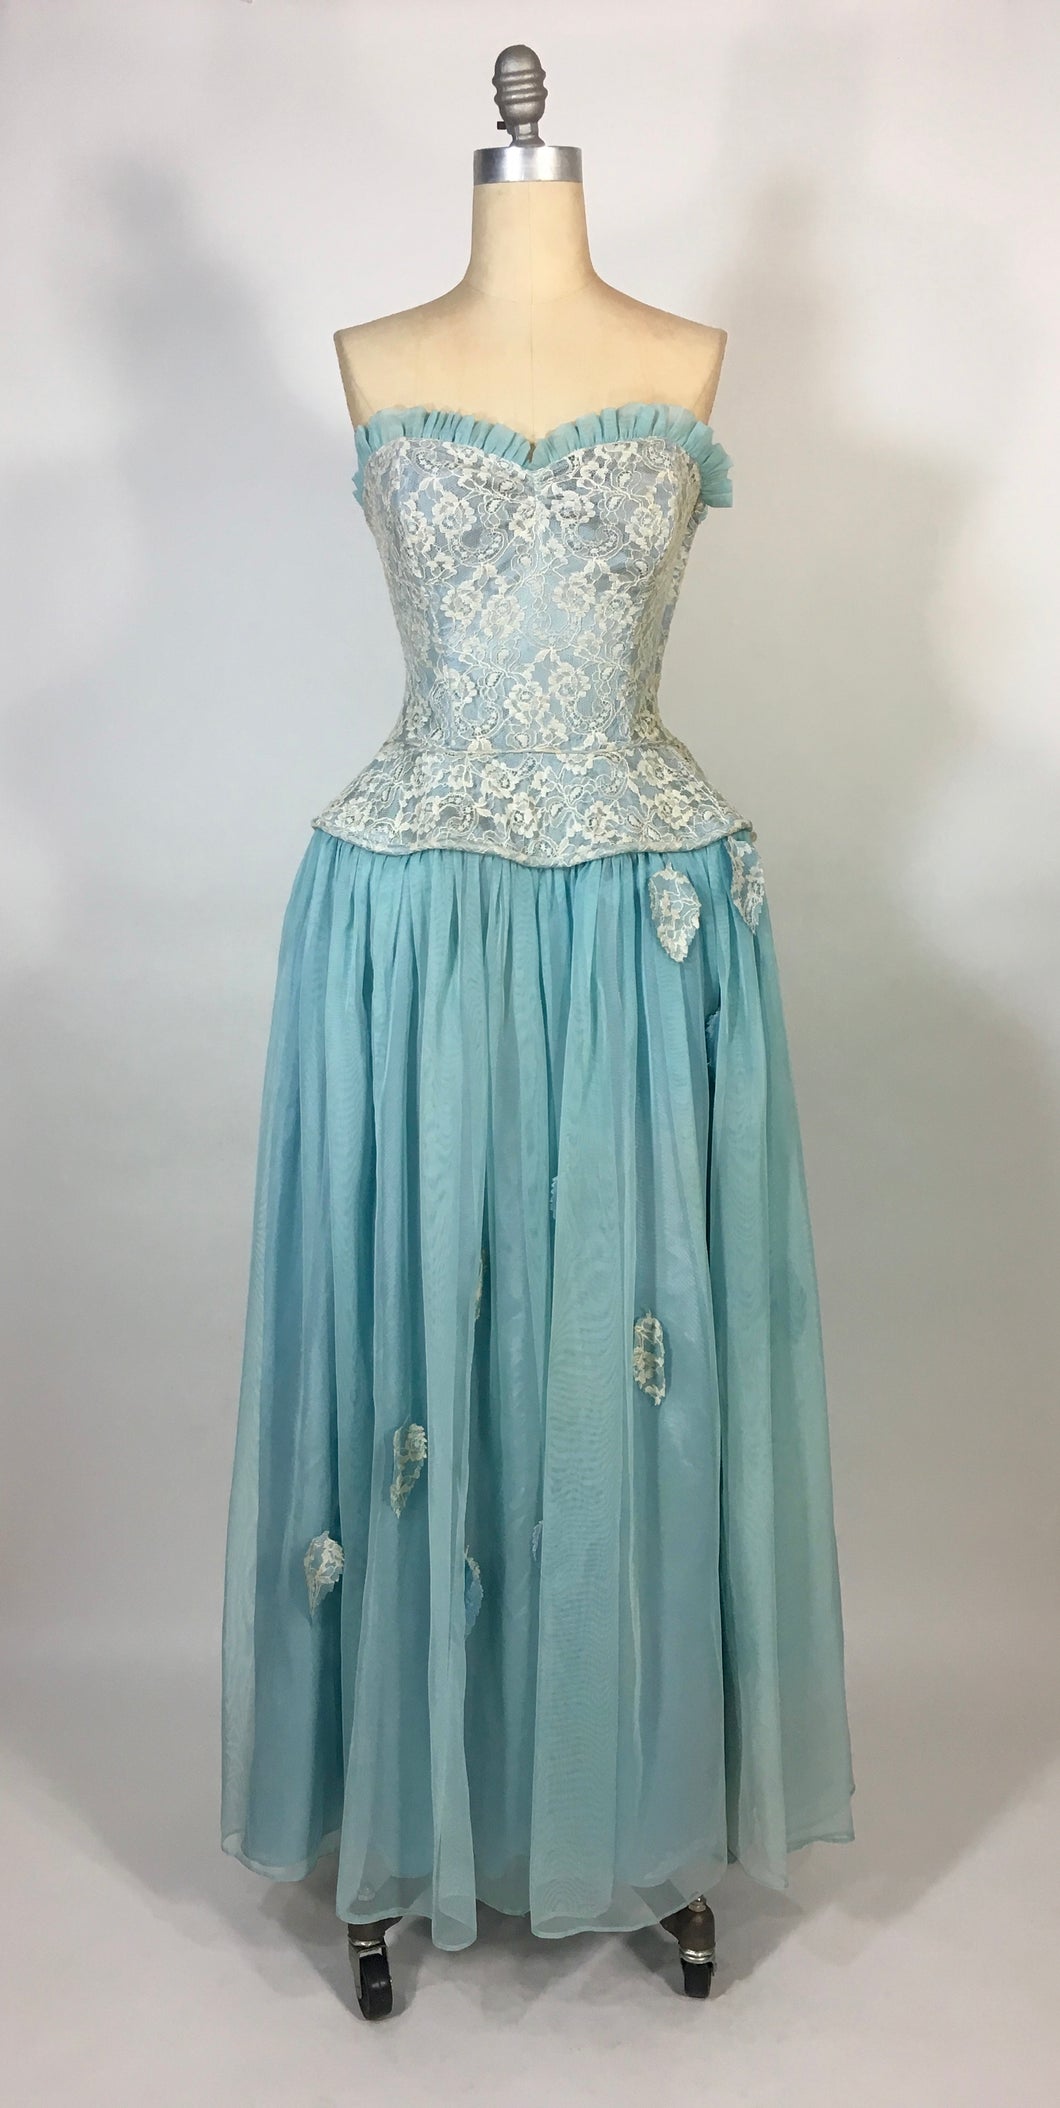 1940’s-50’s light blue formal strapless robe de style gown by Best & Co.